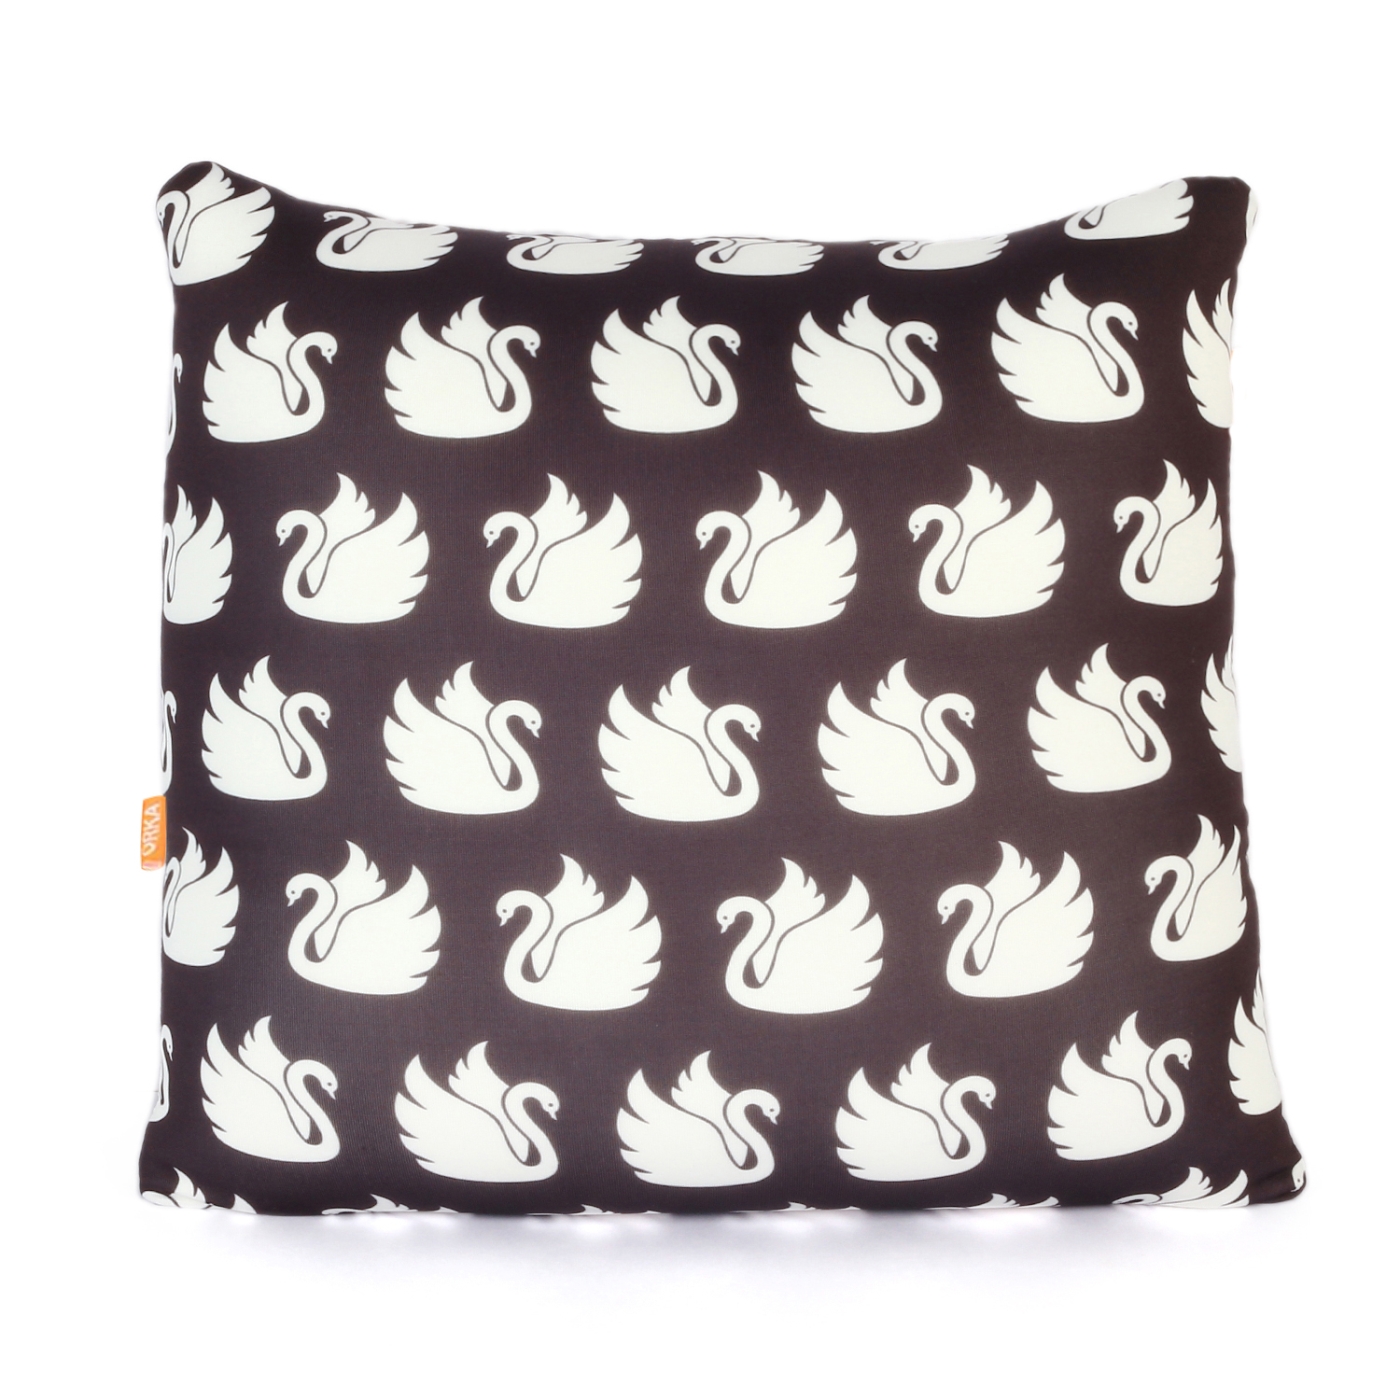 ORKA Digital Printed Spandex Filled With Microbeads Square Cushion 14 X 14 Inch - Black, White  